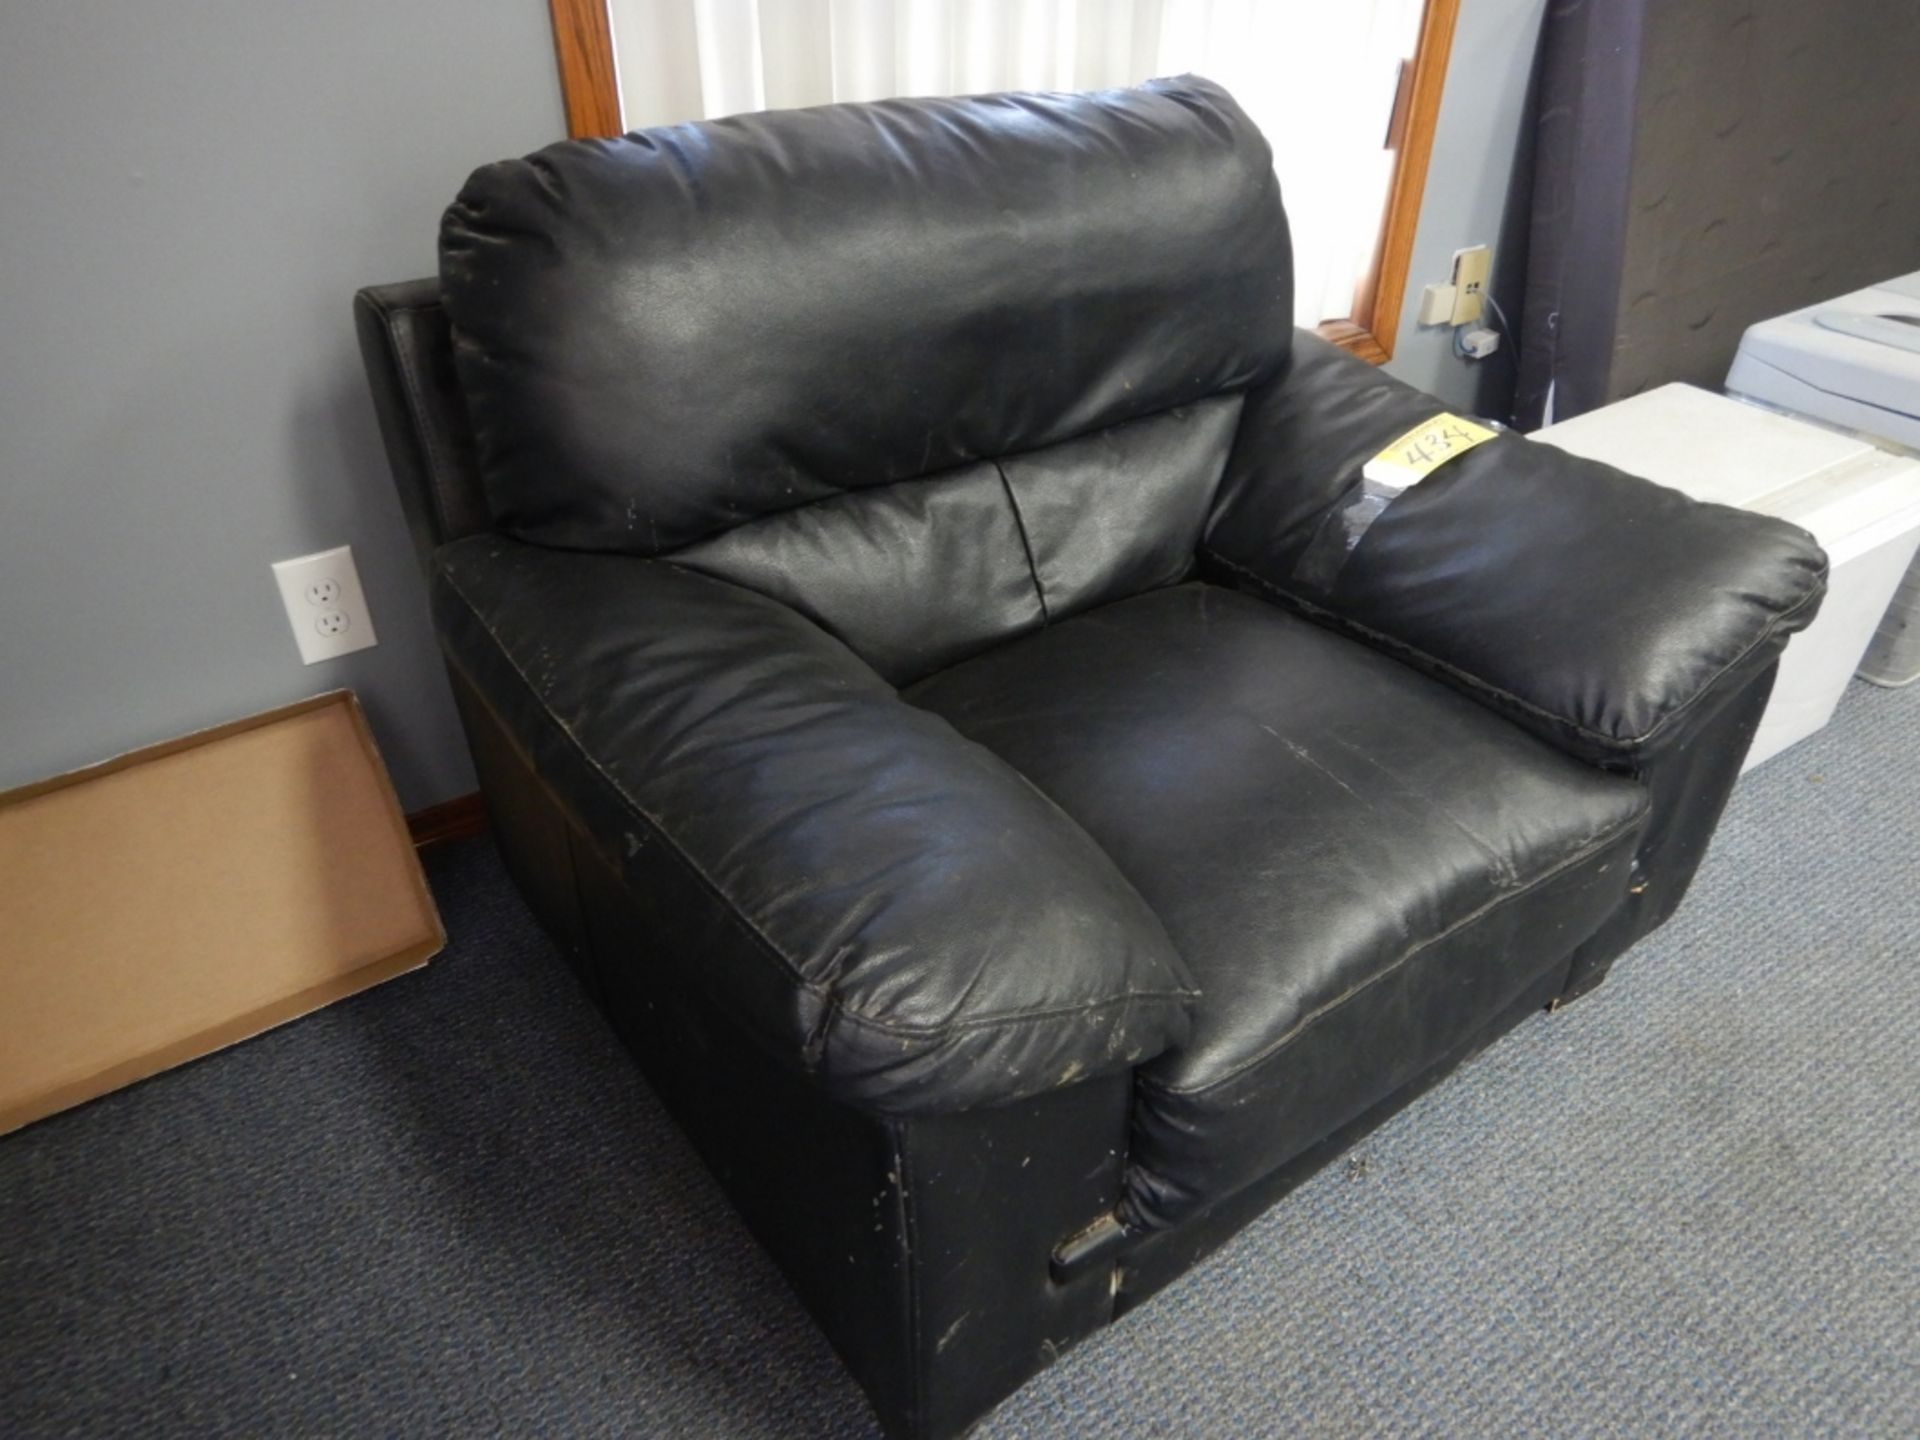 BLACK LEATHER SOFA CHAIR, COFFEE TABLE ETC - Image 3 of 3